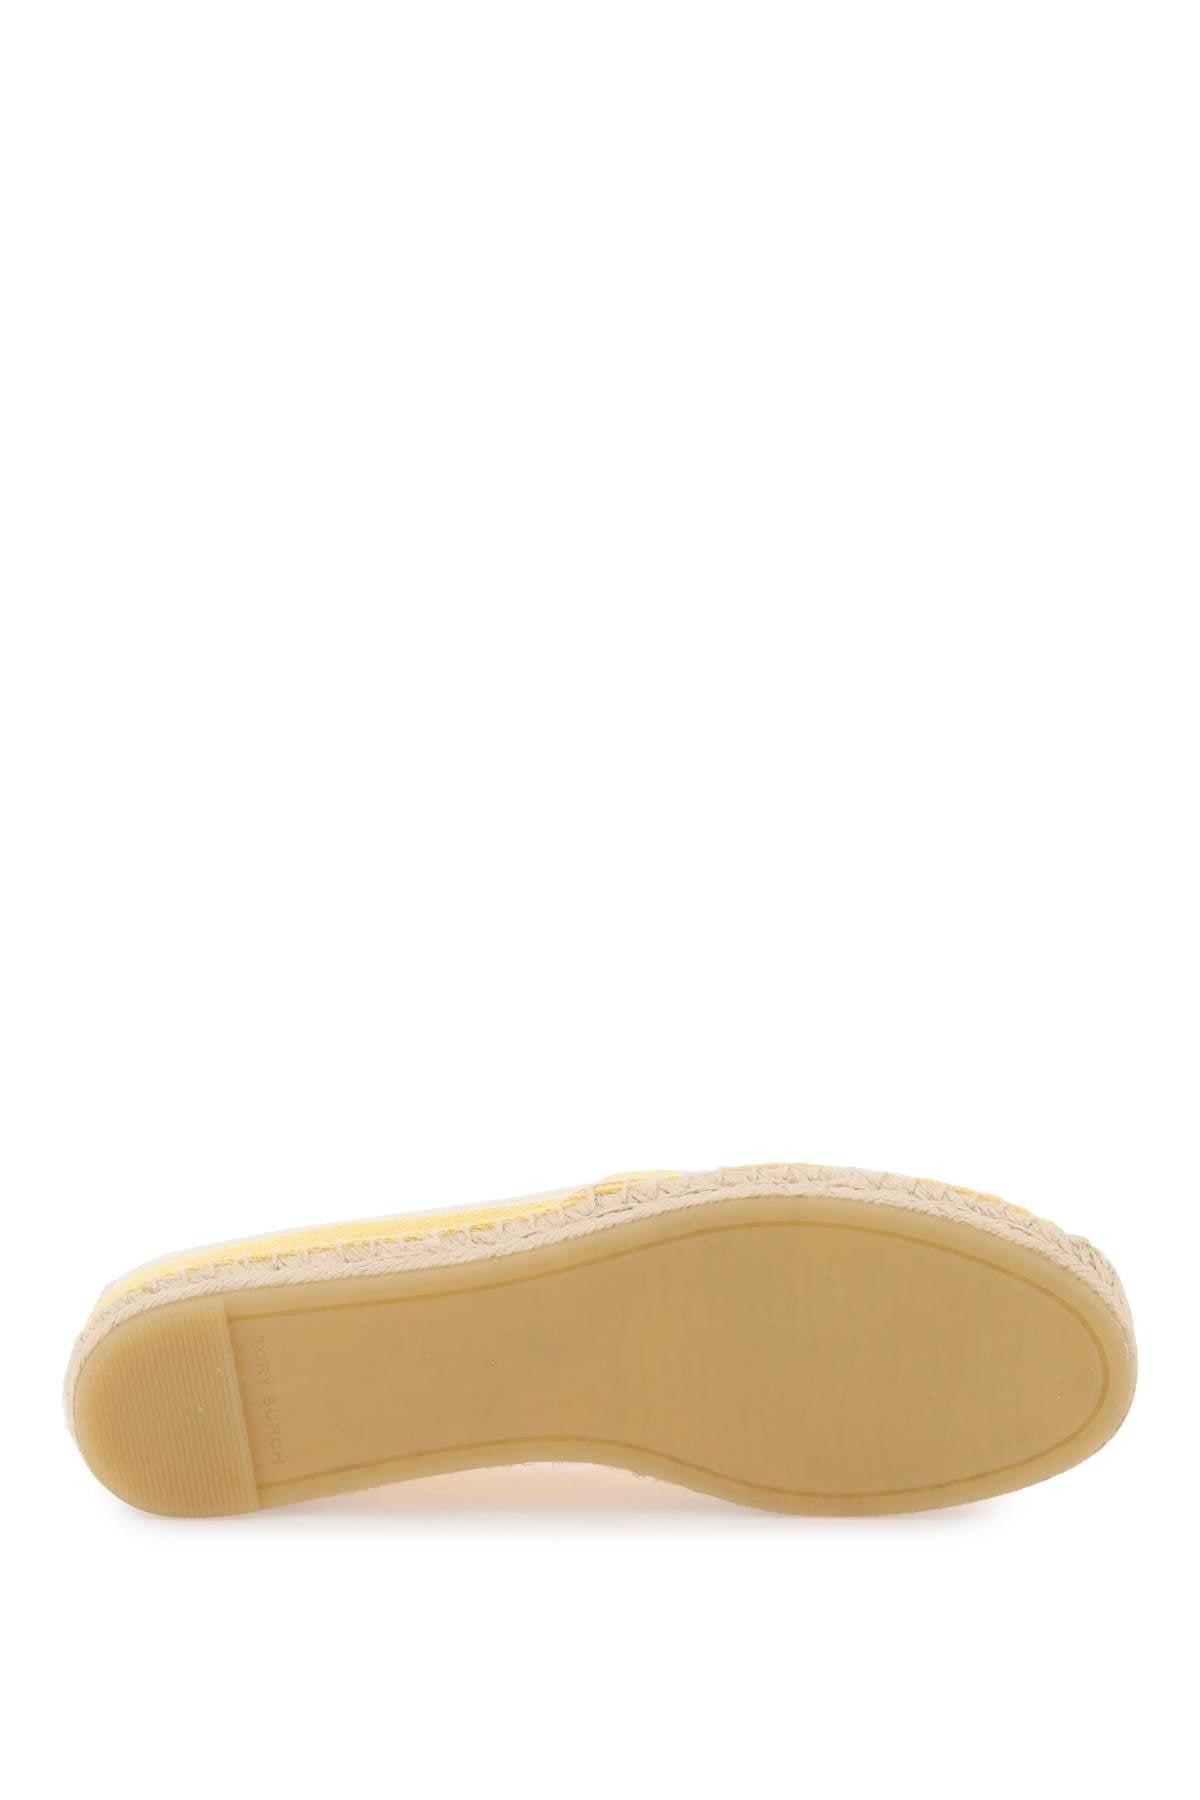 Shop Tory Burch Striped Espadrilles With Double T In Yellow